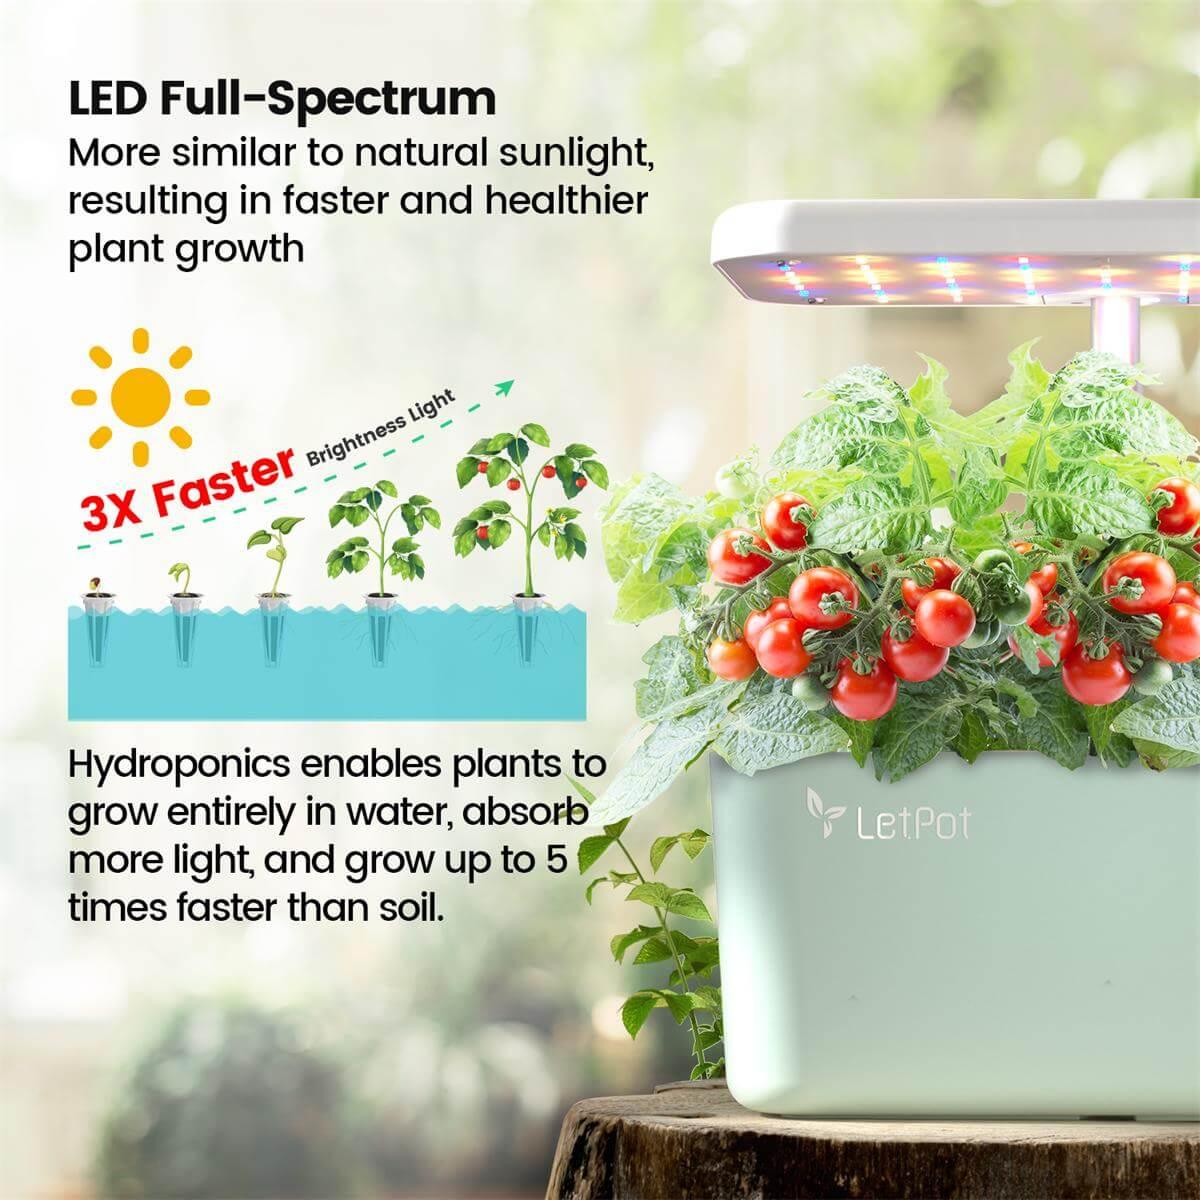 LetPot Mini indoor hydroponic systems